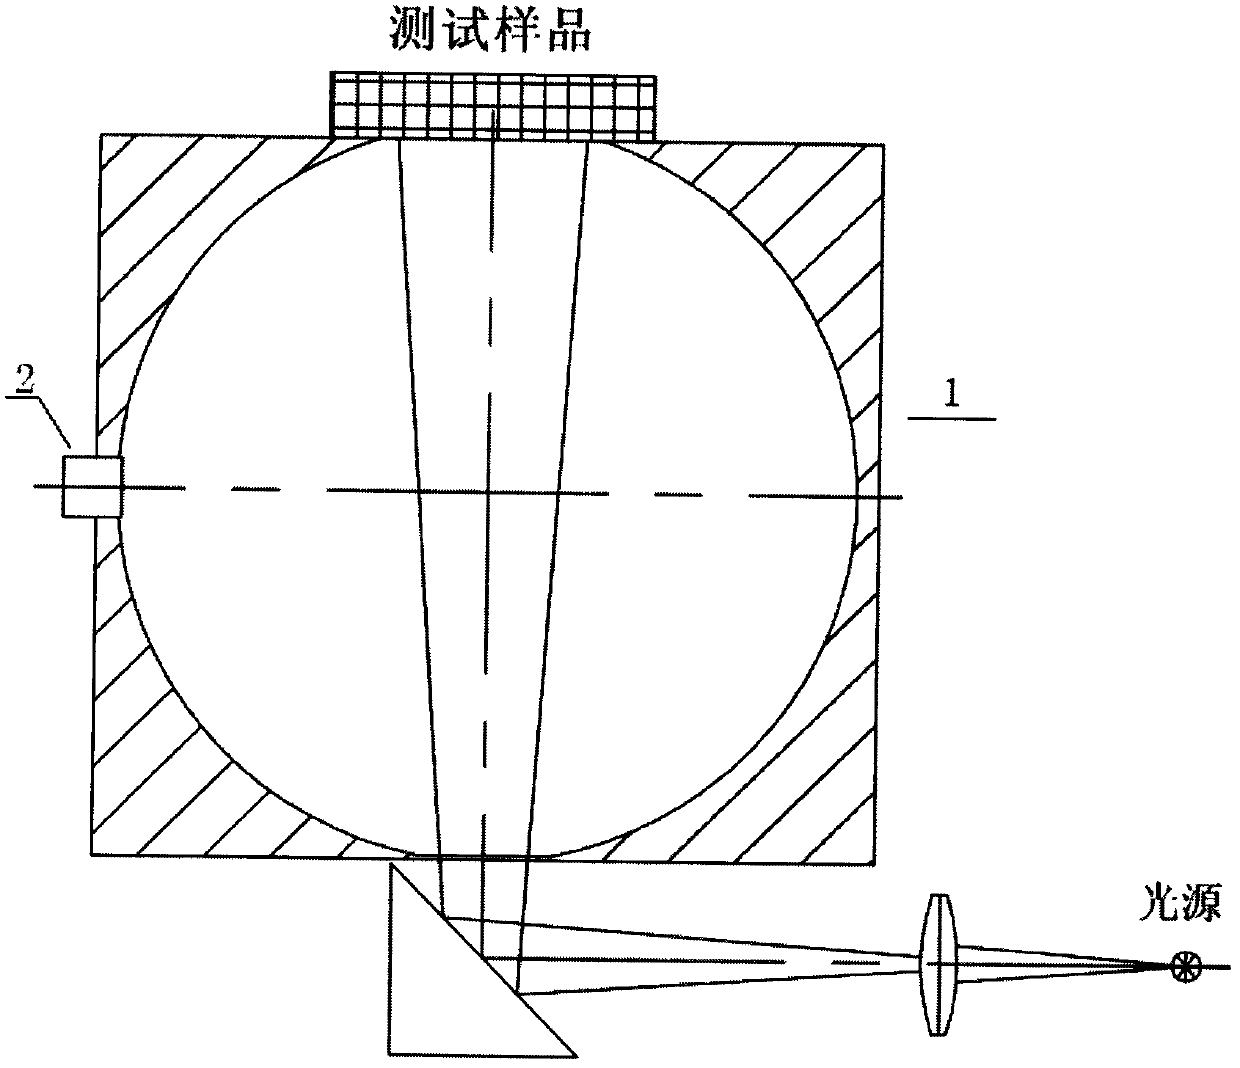 Measurement instrument for removing influence of size factor on color accuracy of diamond